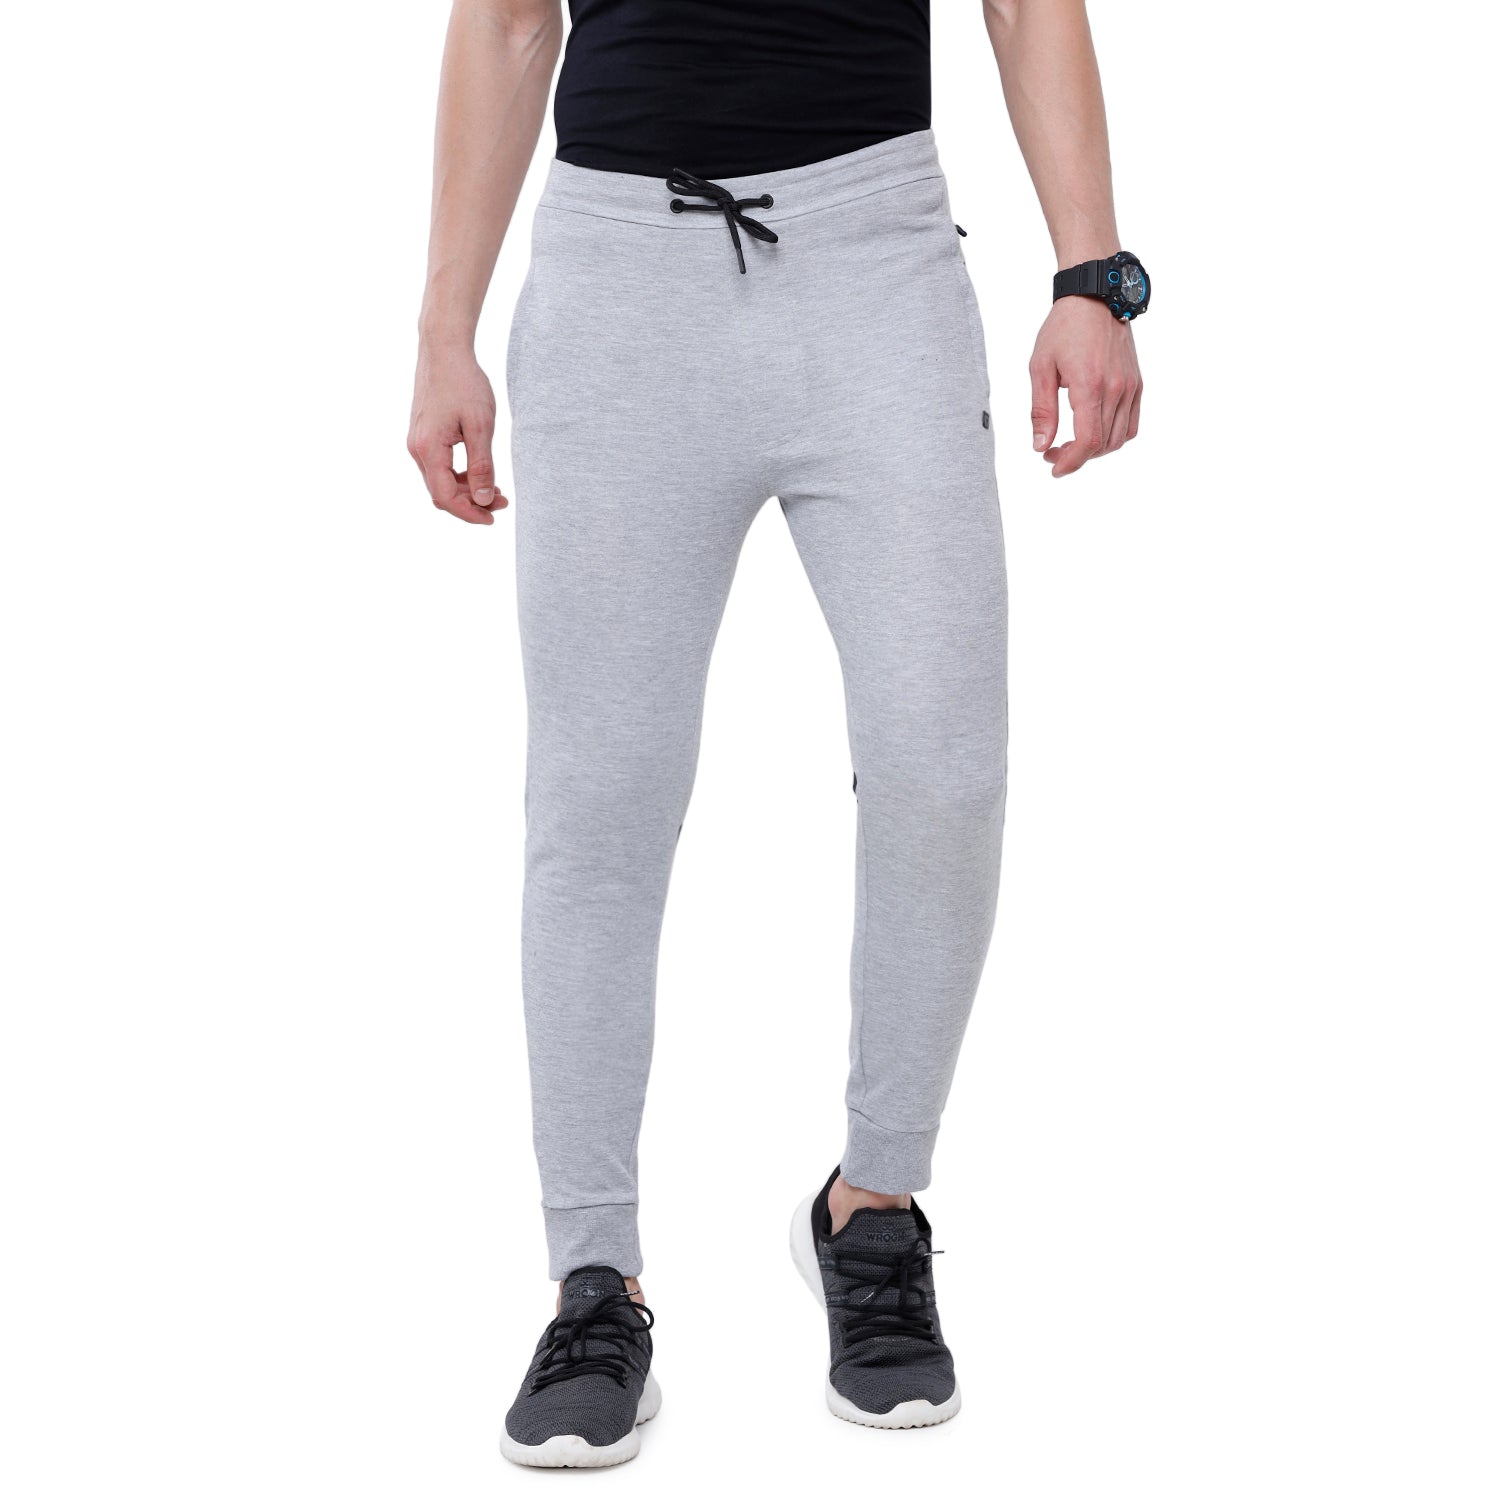 Classic Polo Men's White Solid Mélange Slim Fit Comfy Jogger Pant - Gioz-01 B Track Pants Classic Polo 